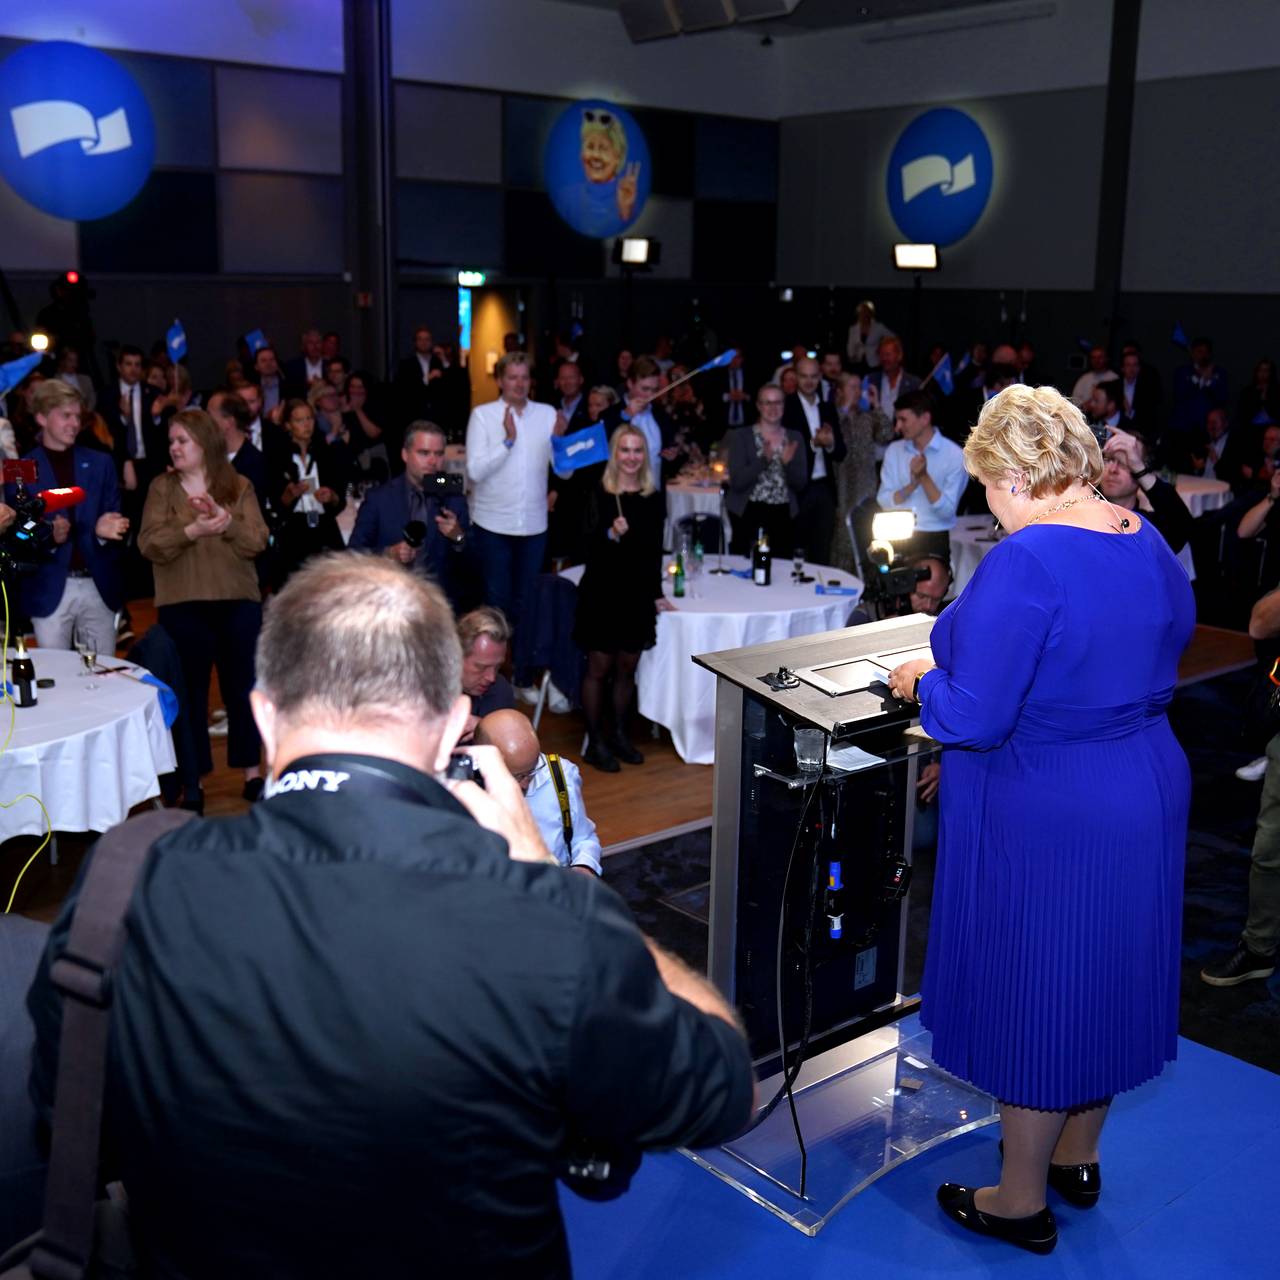 Erna Solberg speaks at the Conservative Party's election rally